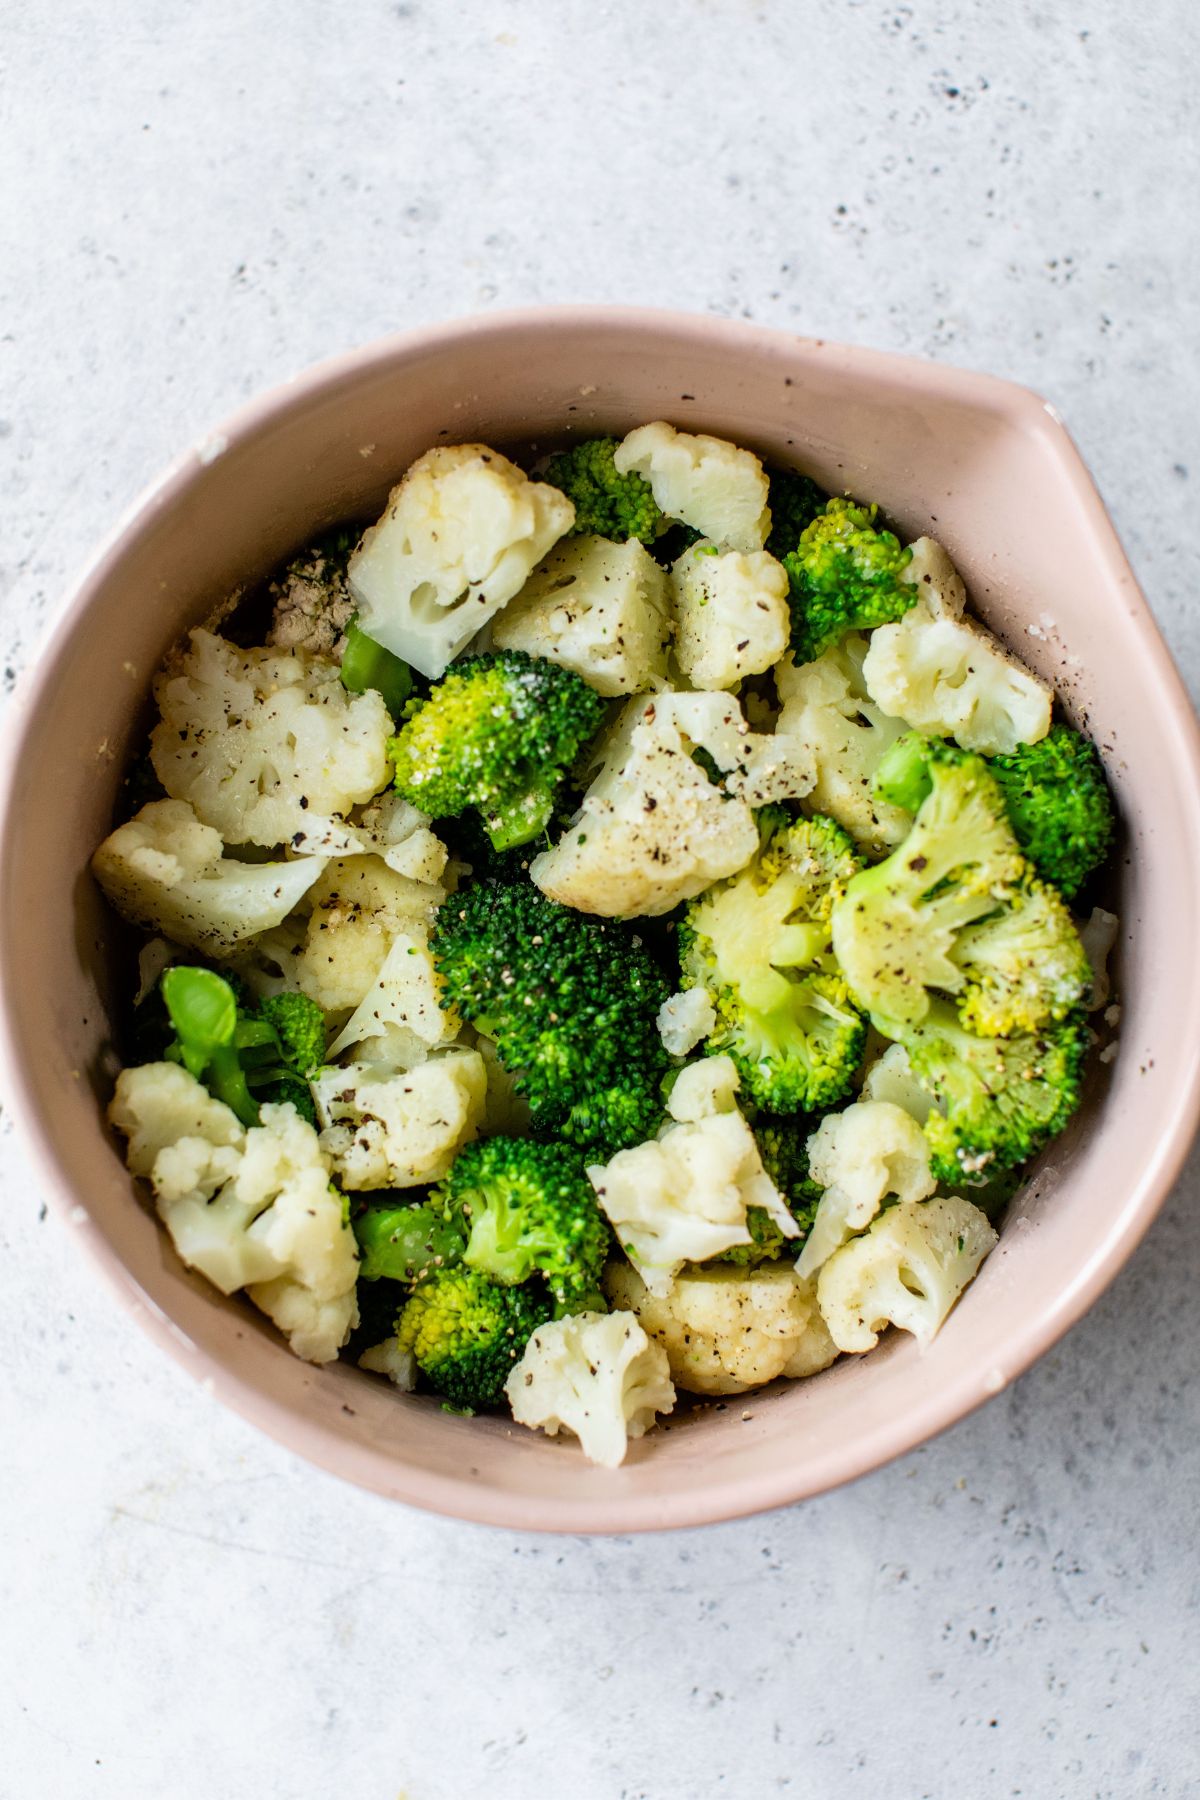 Broccoli and cauliflower in a large bowl.